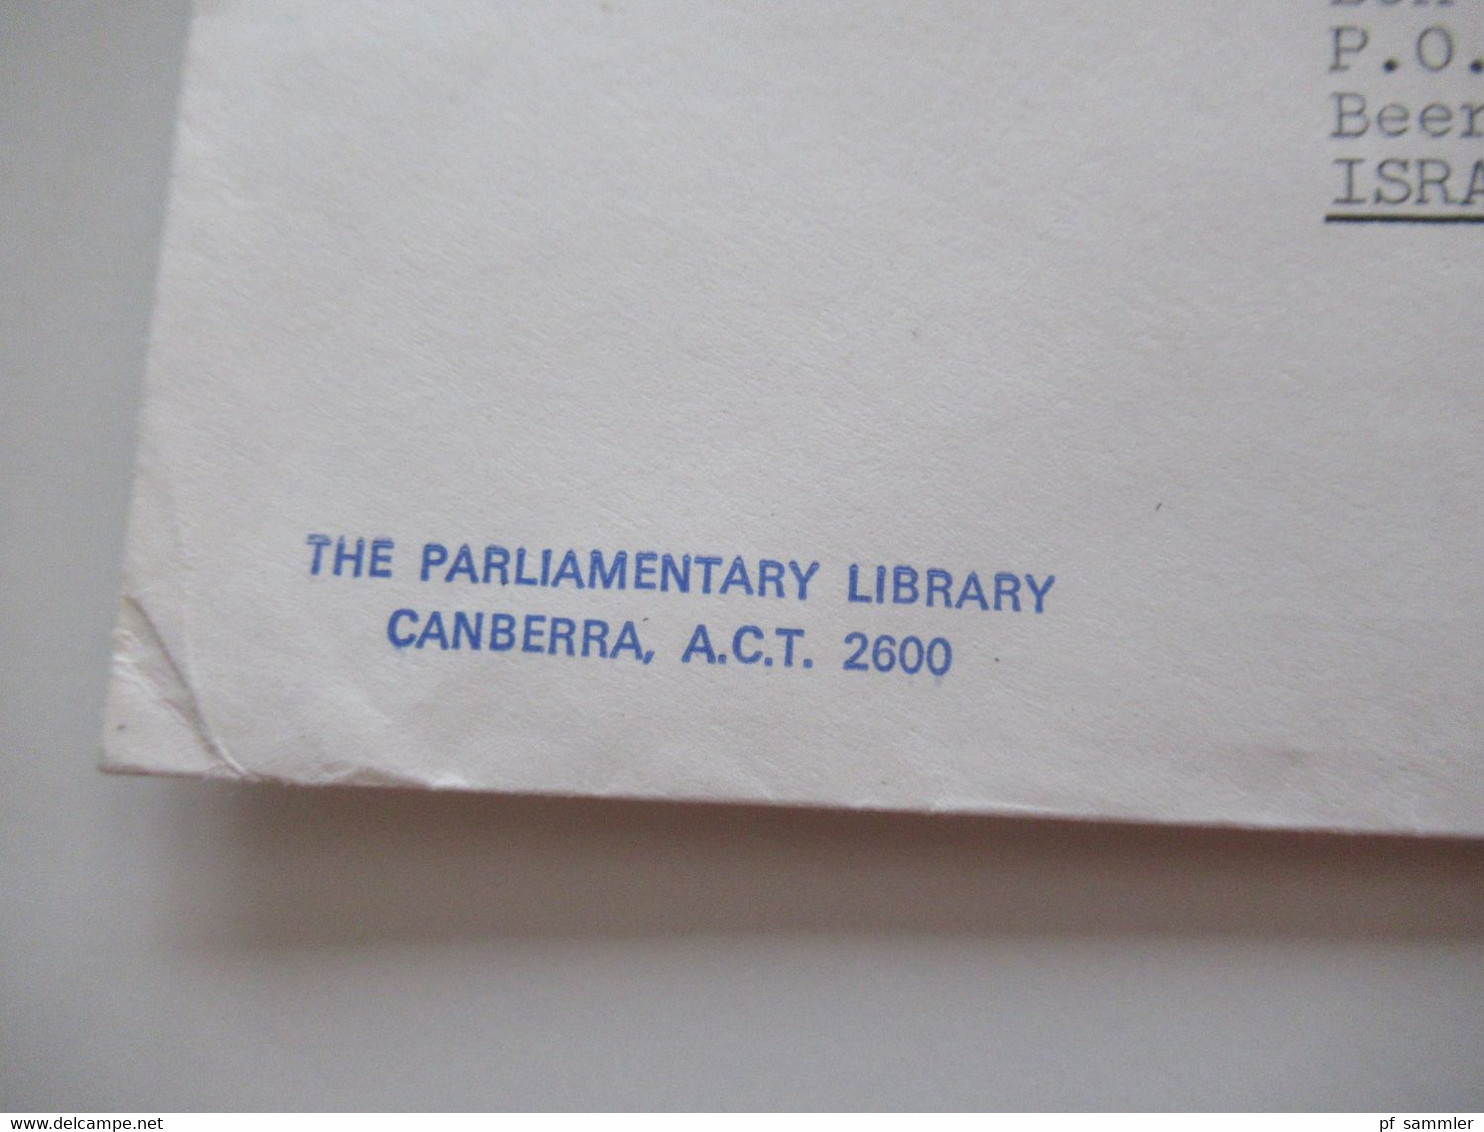 1976 Air Mail Nach Israel Freistempel Canberra Parliament House IW 9 Postage Paid Umschlag The Parliament Library - Storia Postale